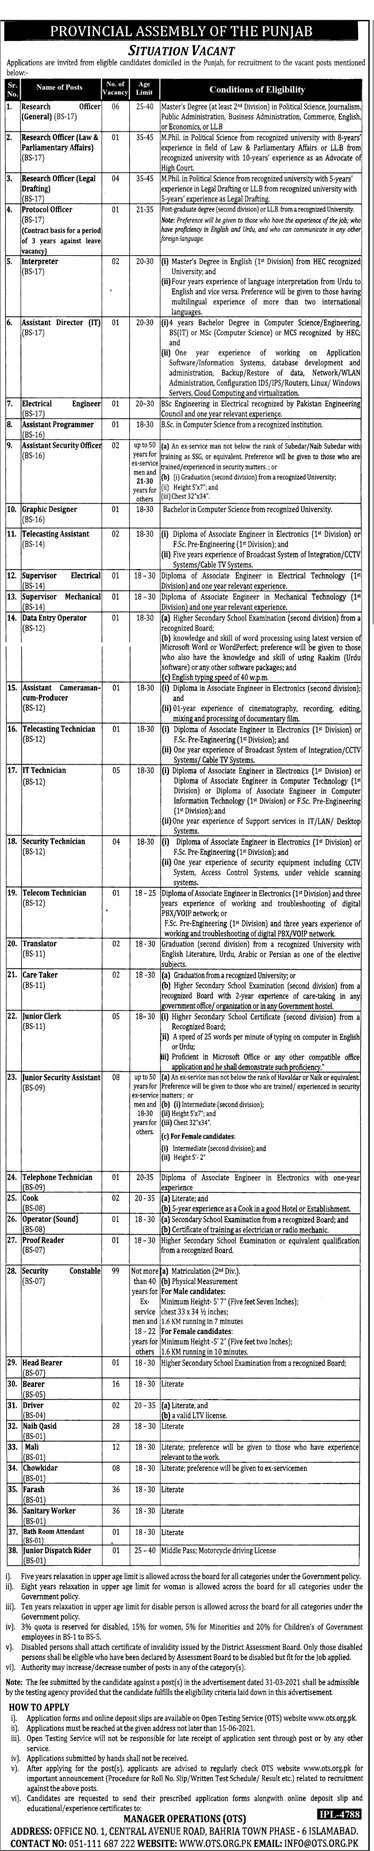 Provincial Assembly of the Punjab Jobs May 2021